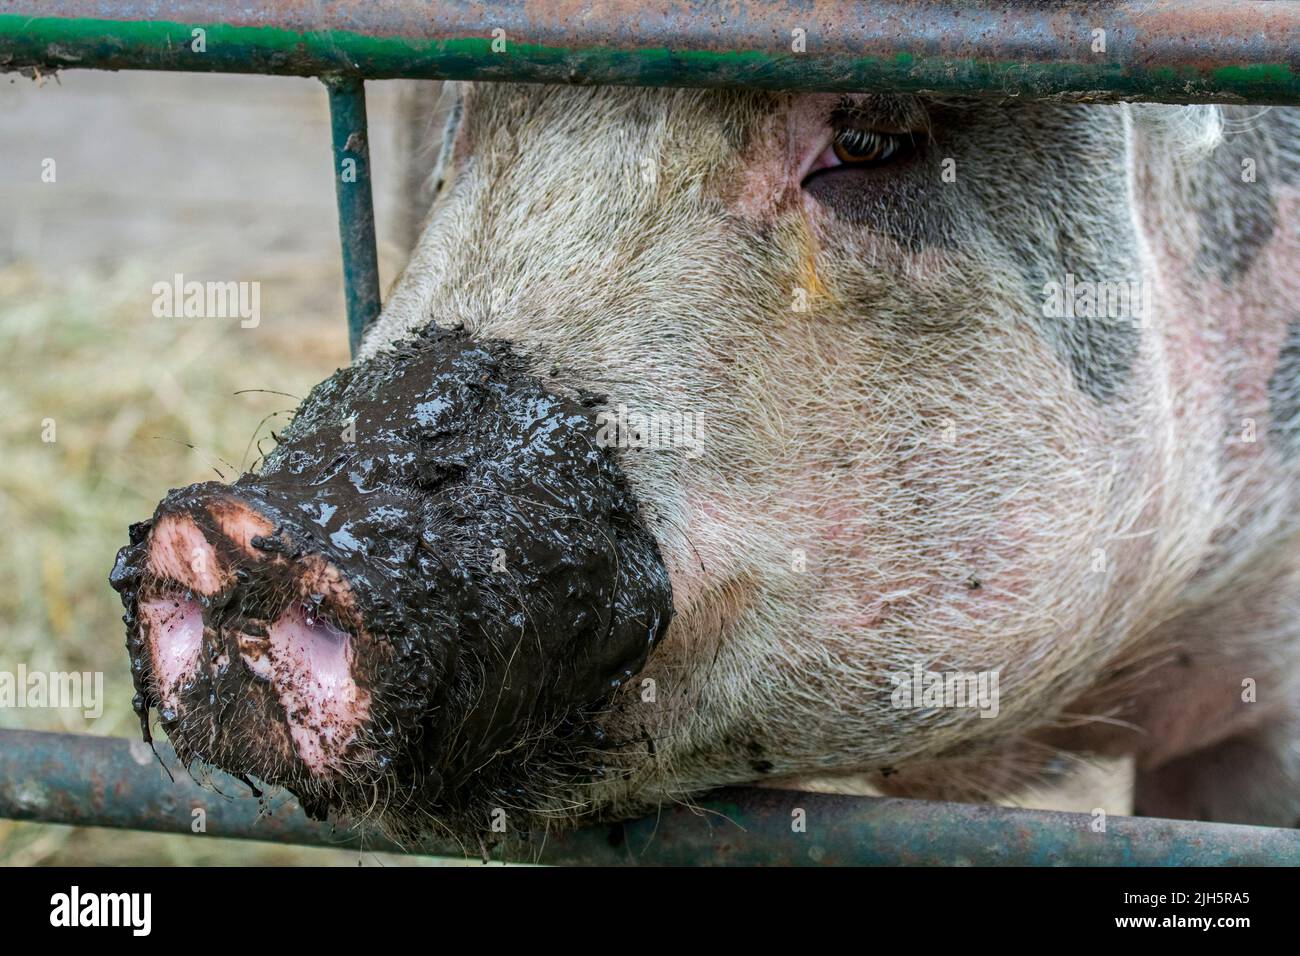 Close-up of long muddy snout / nose of domestic pig / swine (Sus domesticus) sticking through metal fence at farm Stock Photo